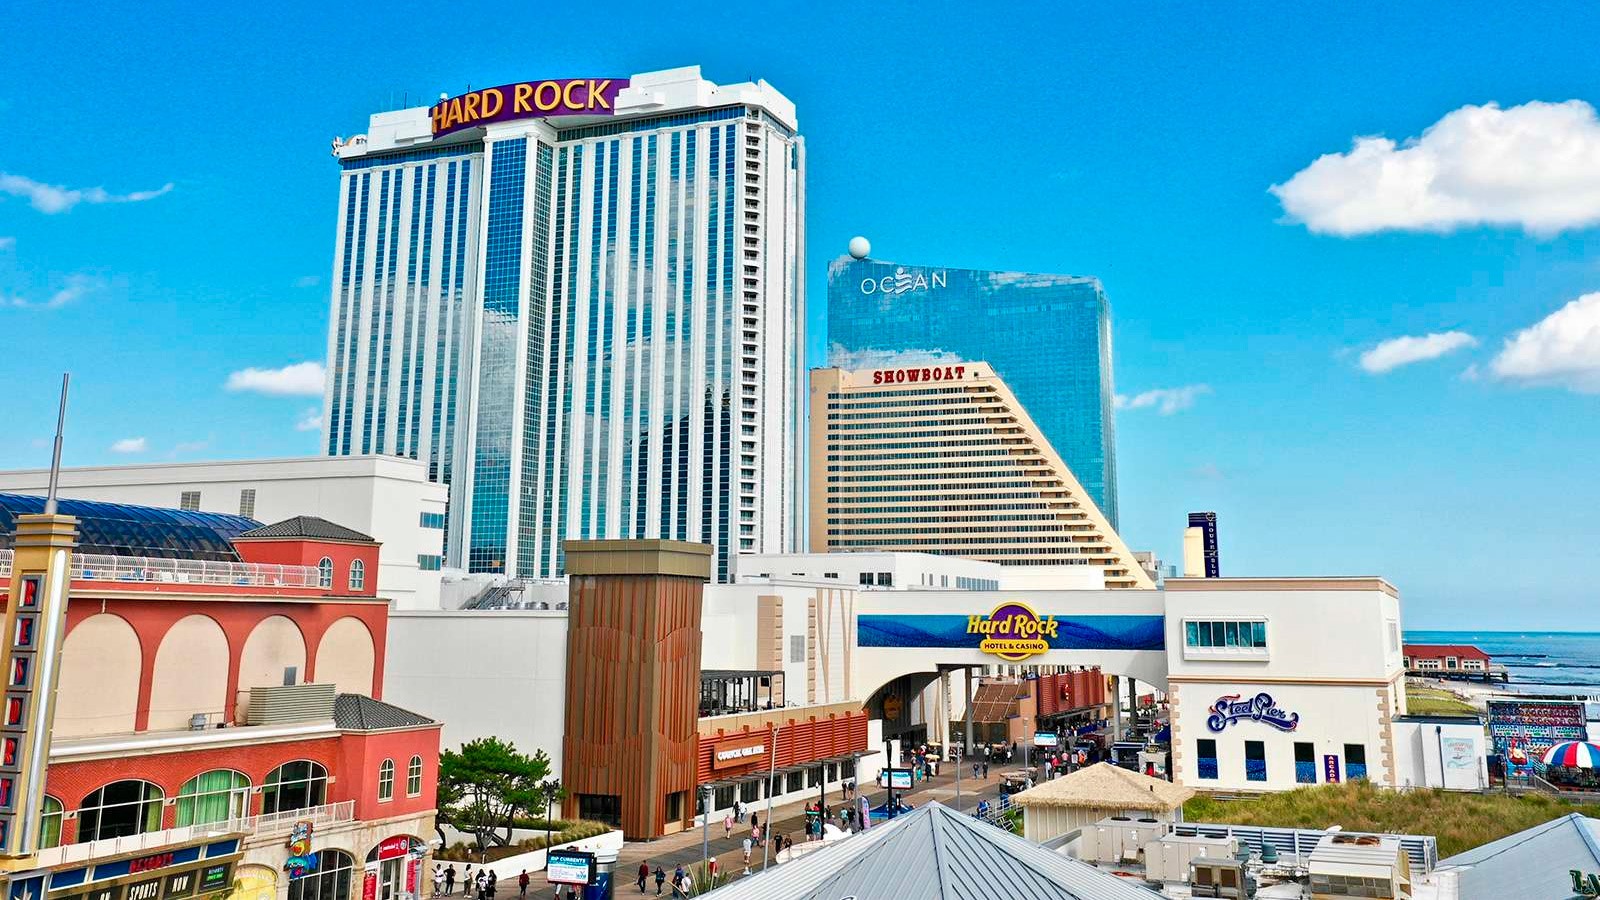 Atlantic City casinos' in-person revenue above pre-pandemic levels with $235M in April; NJ sports betting drop from March